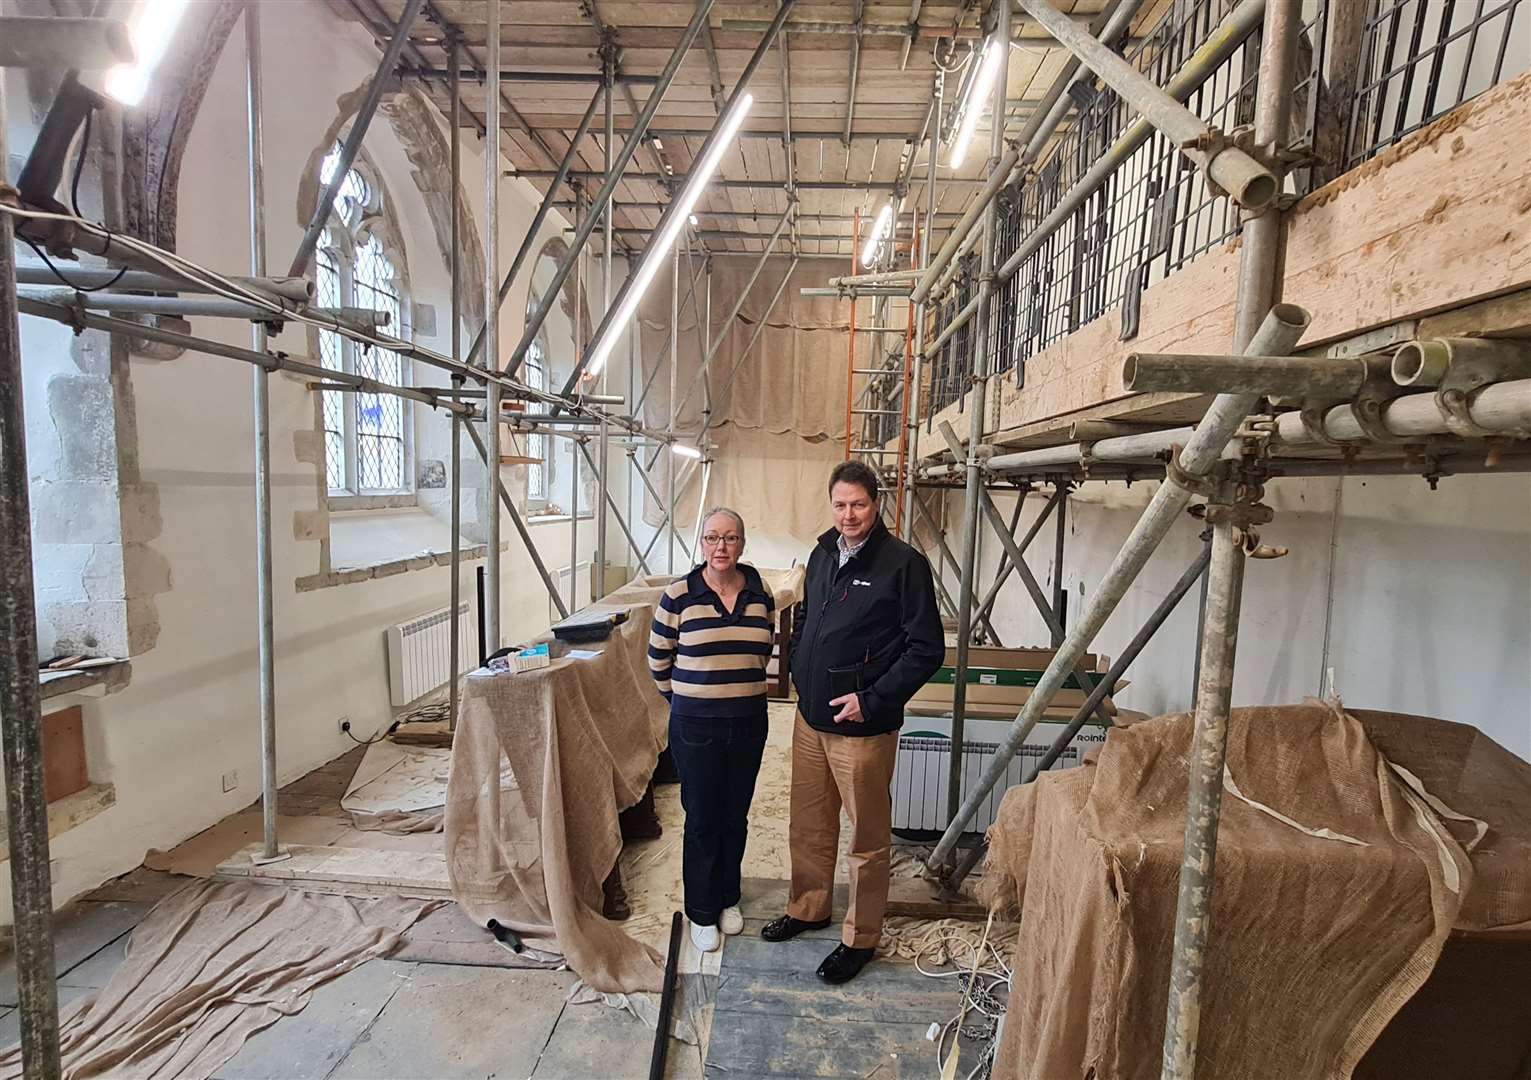 Eastbridge Hospital Clerk and Receiver Louise Knight with trustee Nick Rooke in the upper chapel which is undergoing restoration